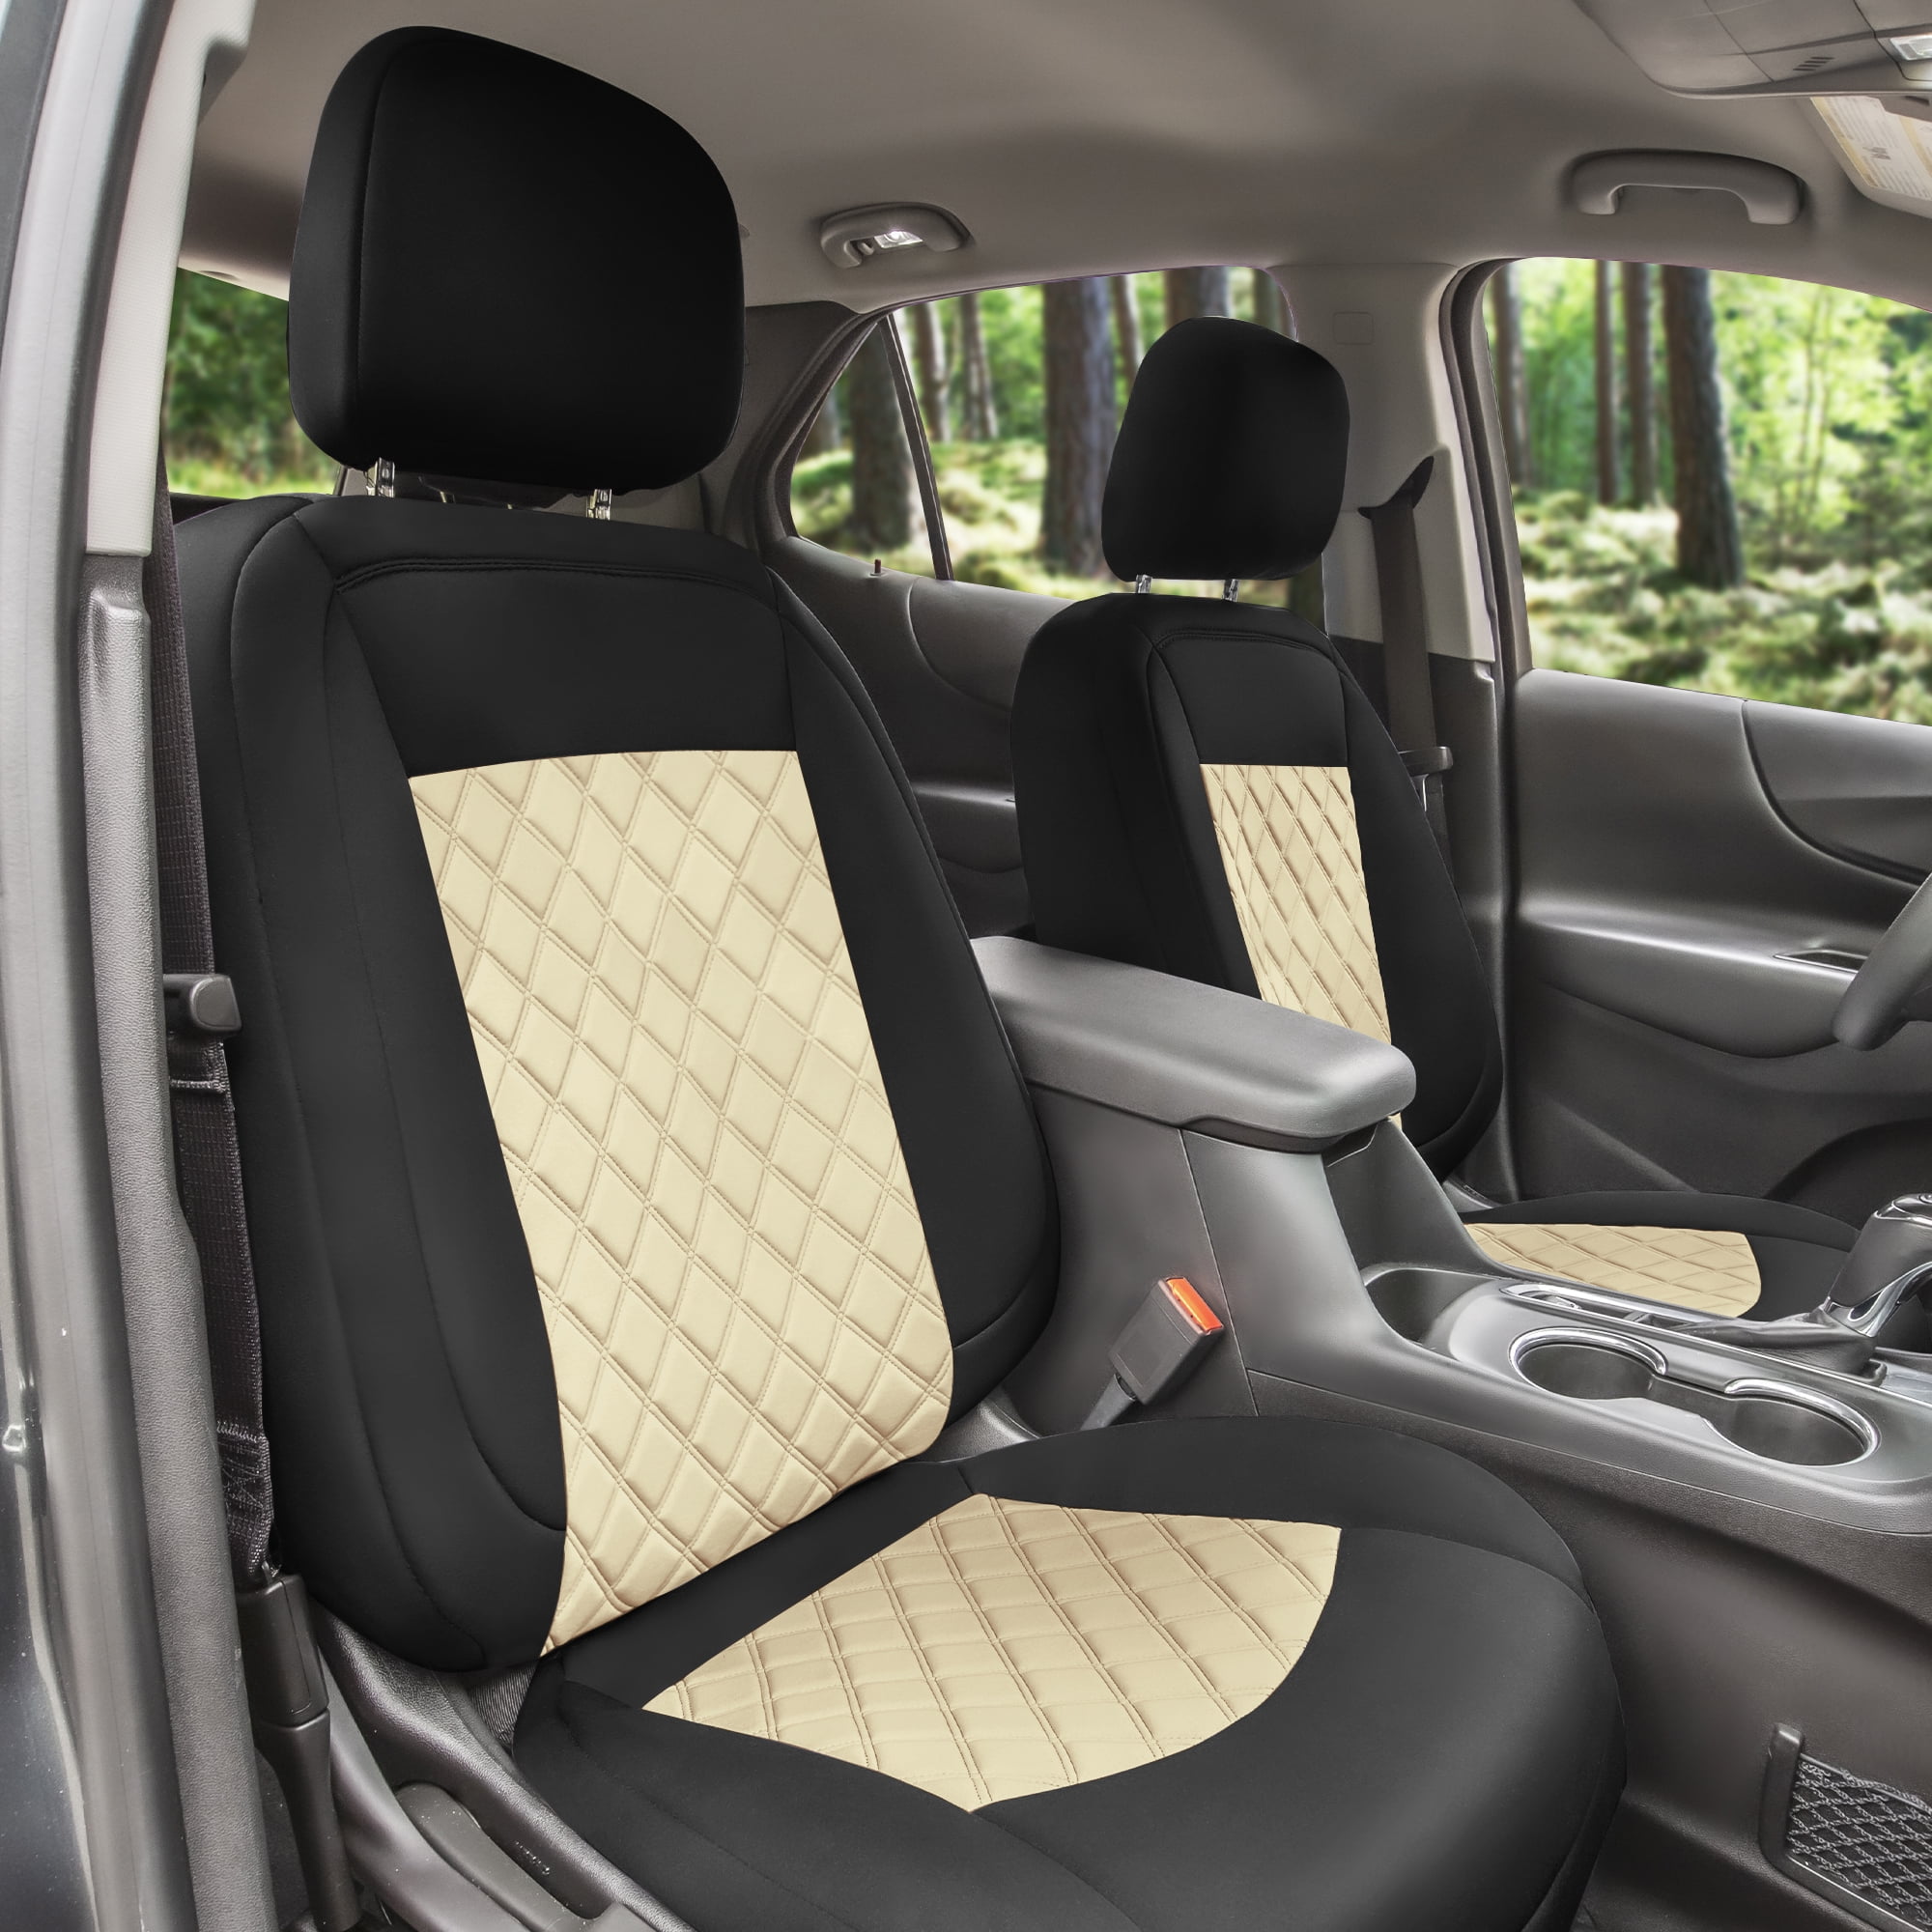 2018-2019 Equinox, TAN OASIS AUTO 2018 2019 Equinox Custom Fit PU Leather Seat Covers Full Set Compatible with Chevrolet Equinox 2018 2019 Equinox